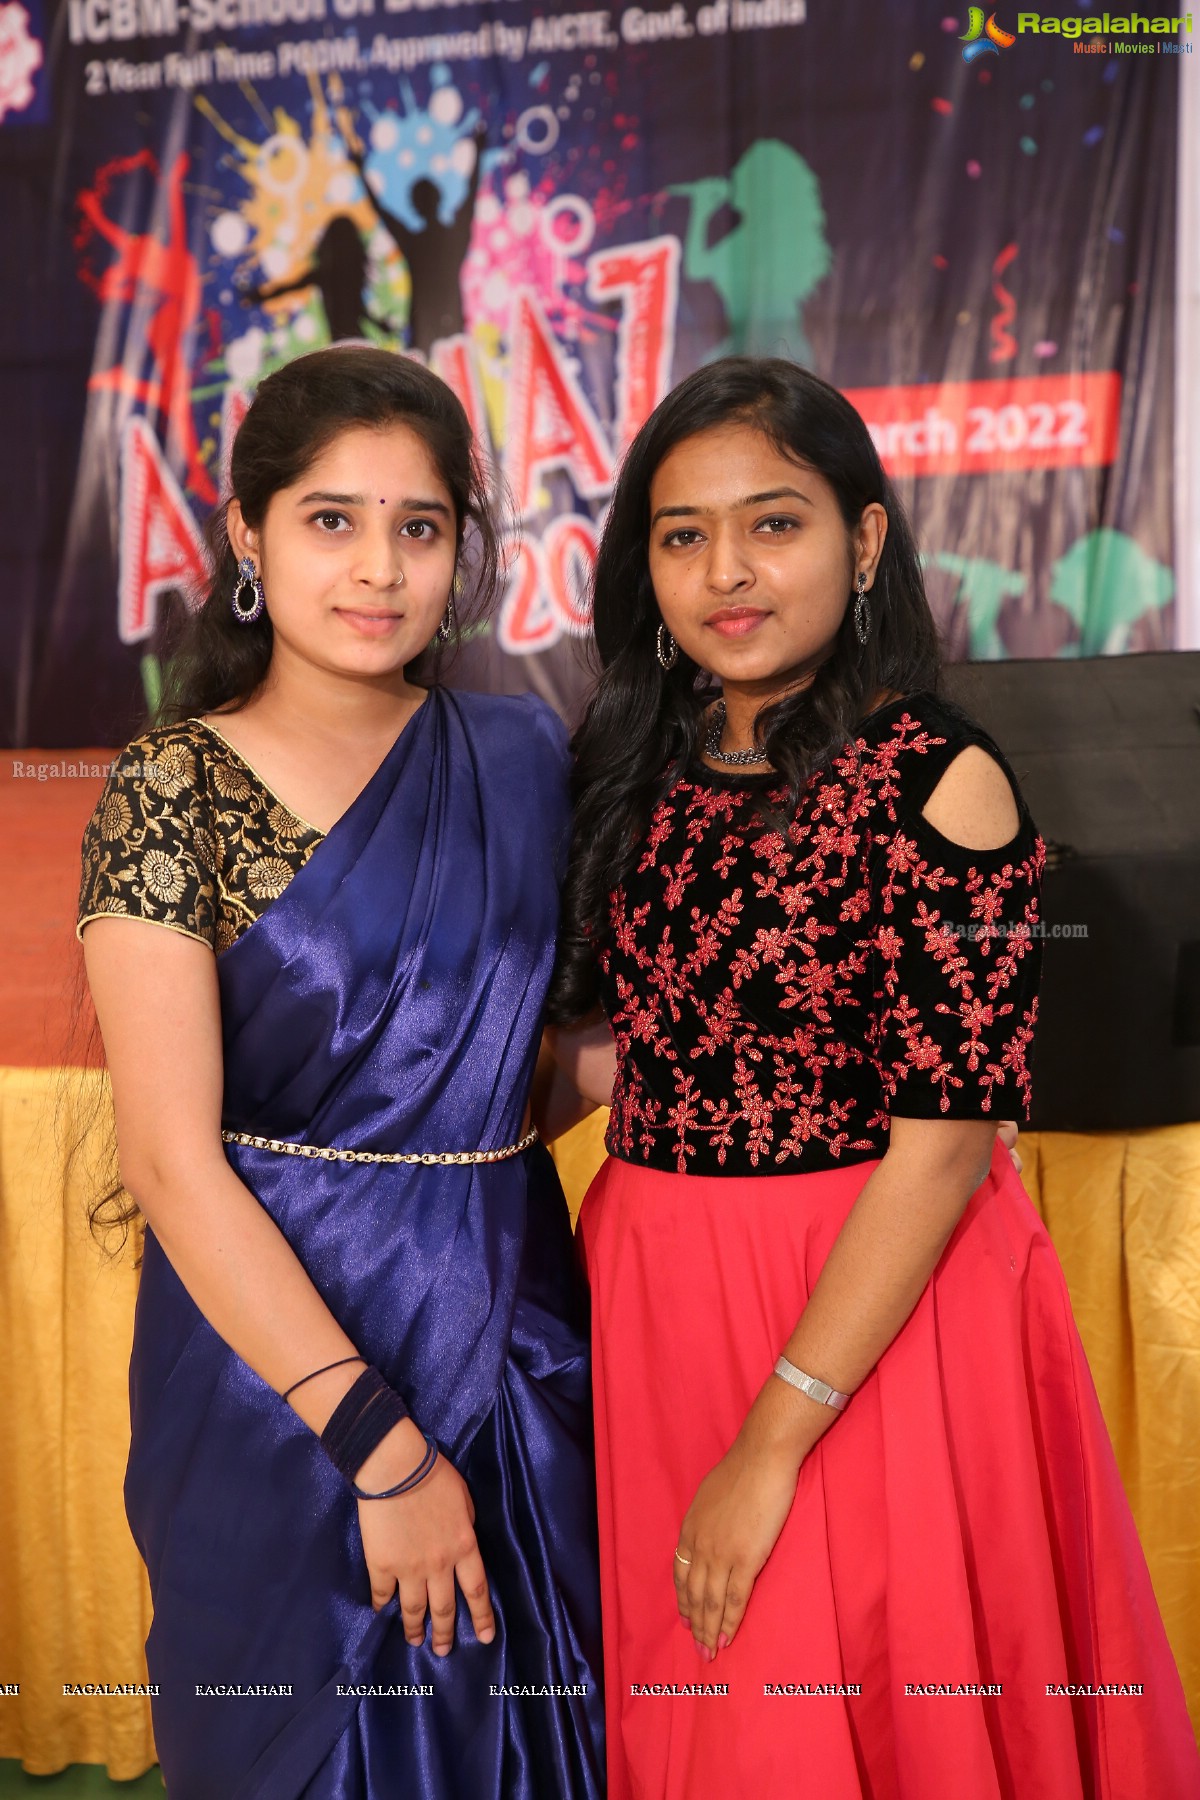 ICBM - School of Business Excellence Grand Freshers Event 2022